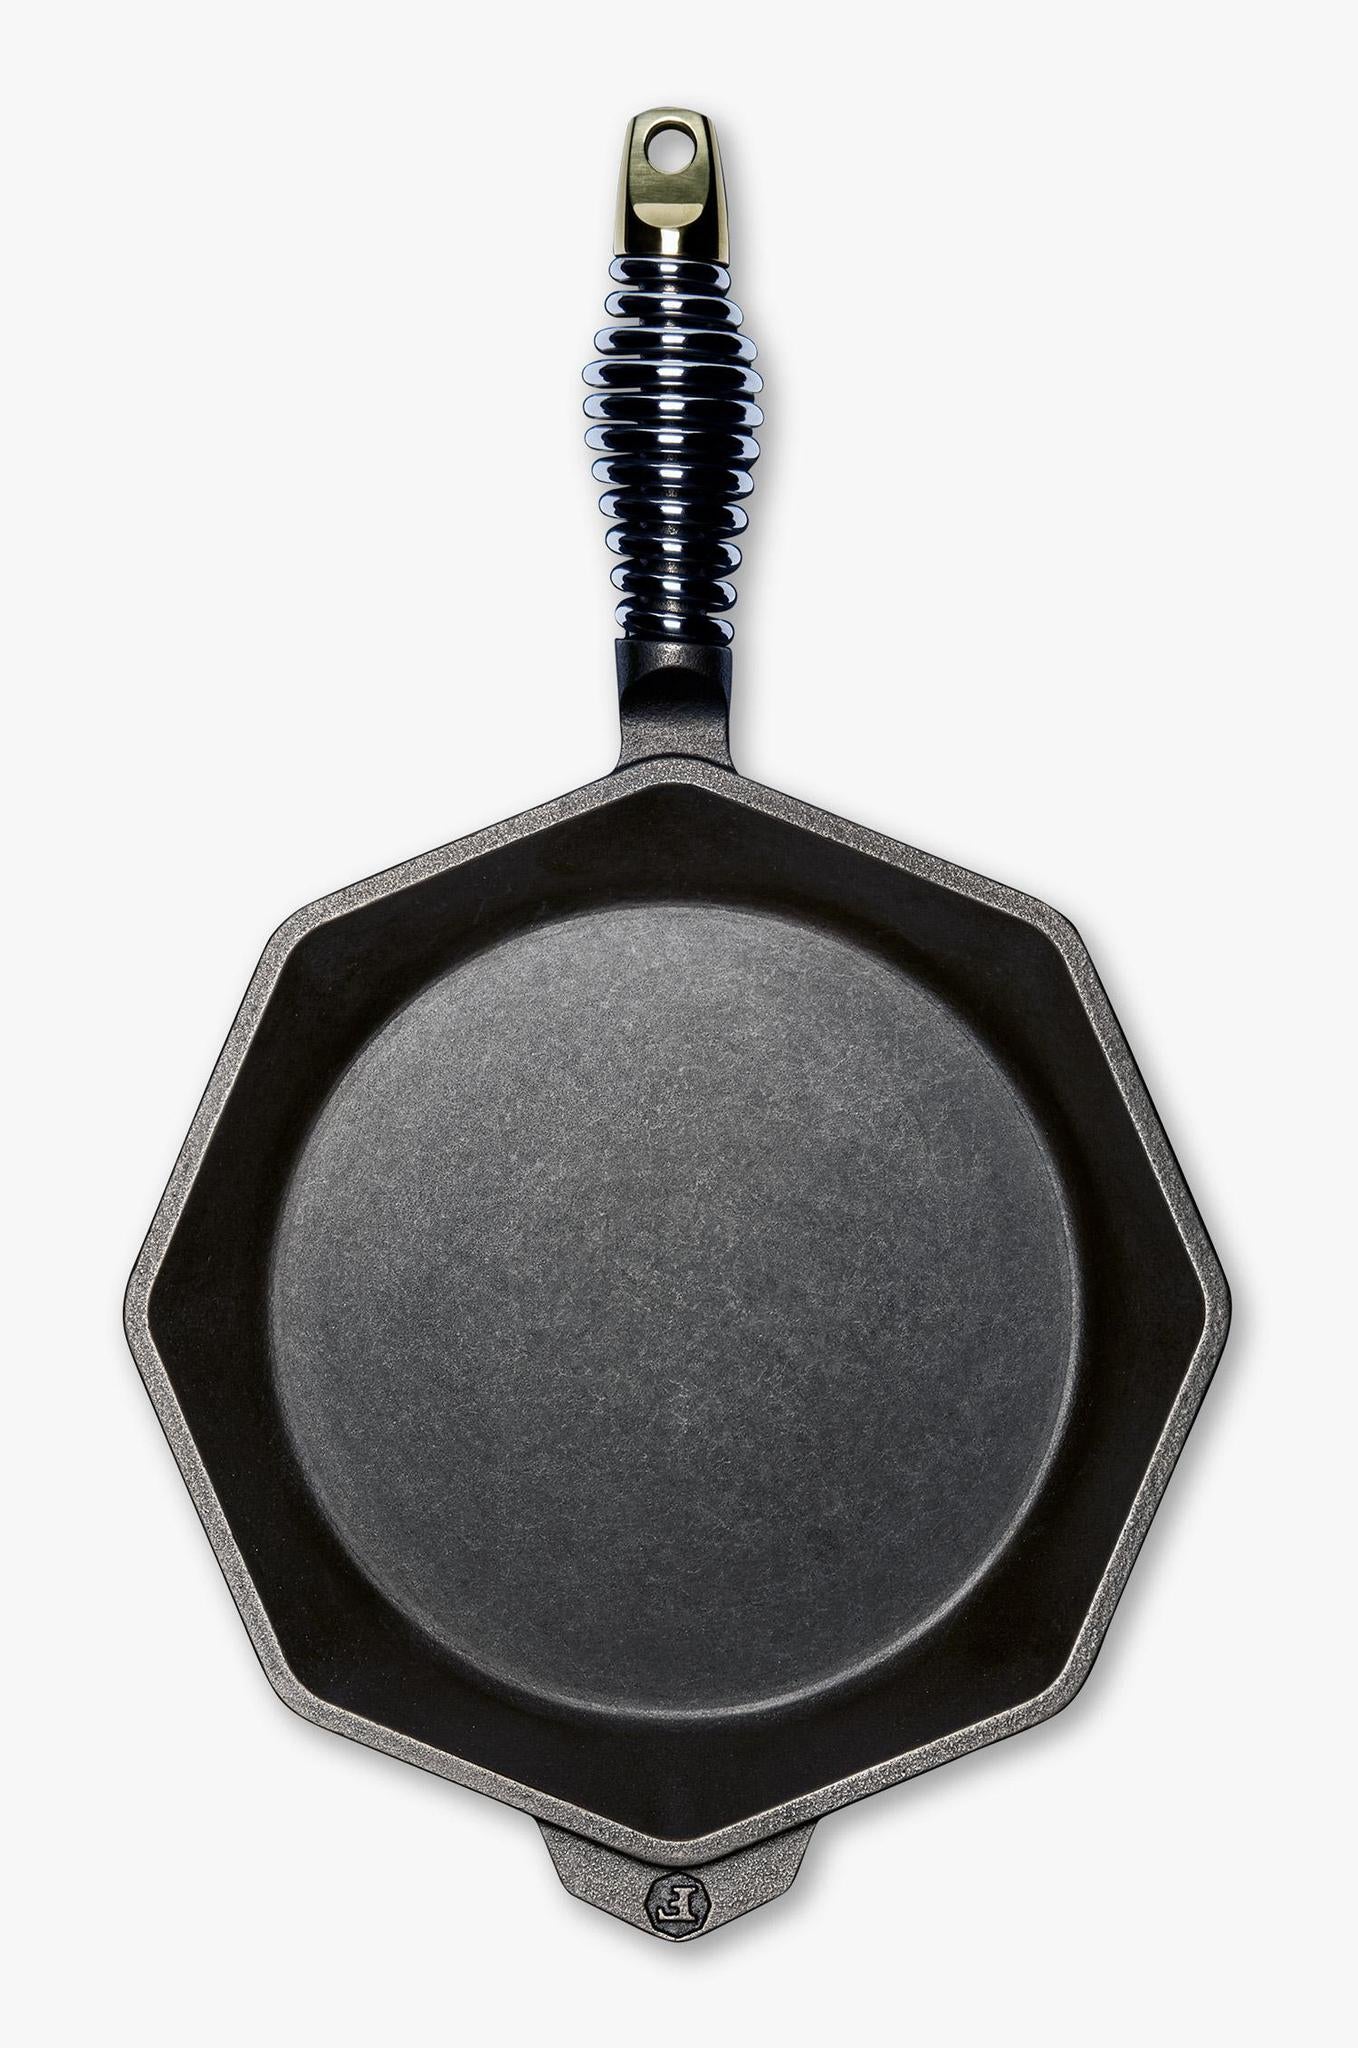 Finex - 10 Cast Iron Skillet With Lid